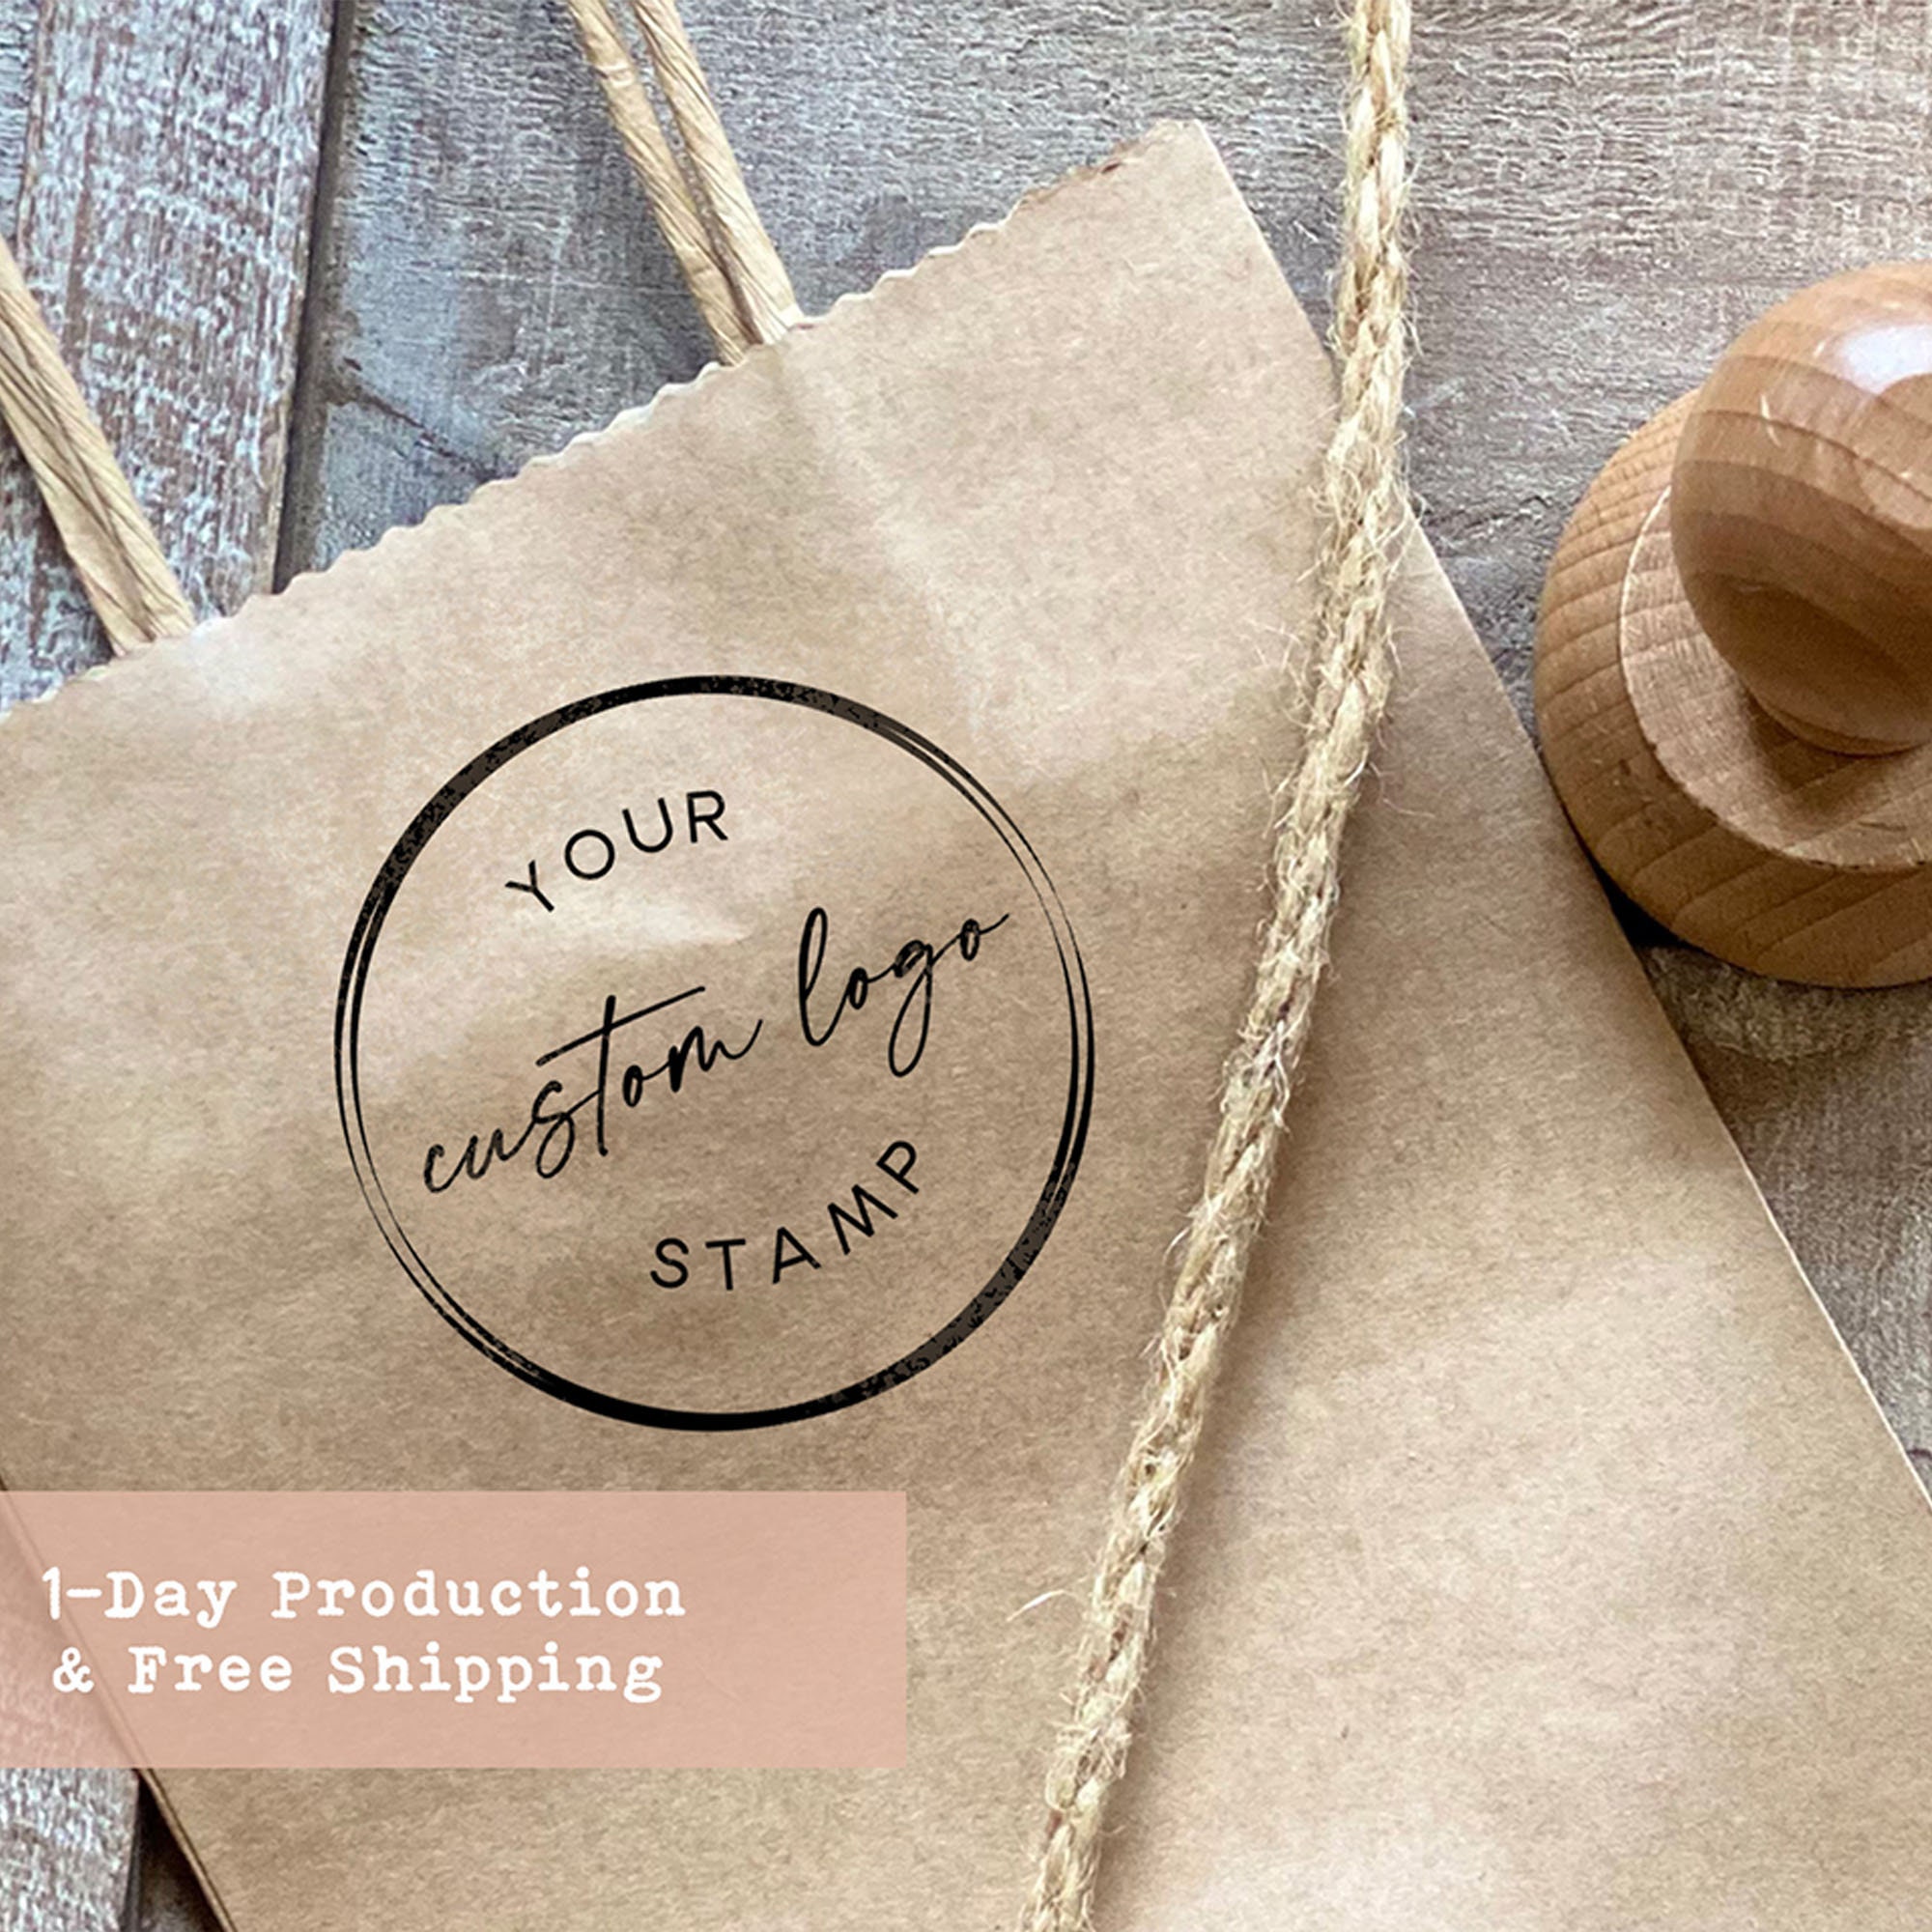 Personalized Stamp with Logo Name - Custom Rubber Stamp with Wood Handle  Customized Soap Stamps Multiple Size for Business - Round 1